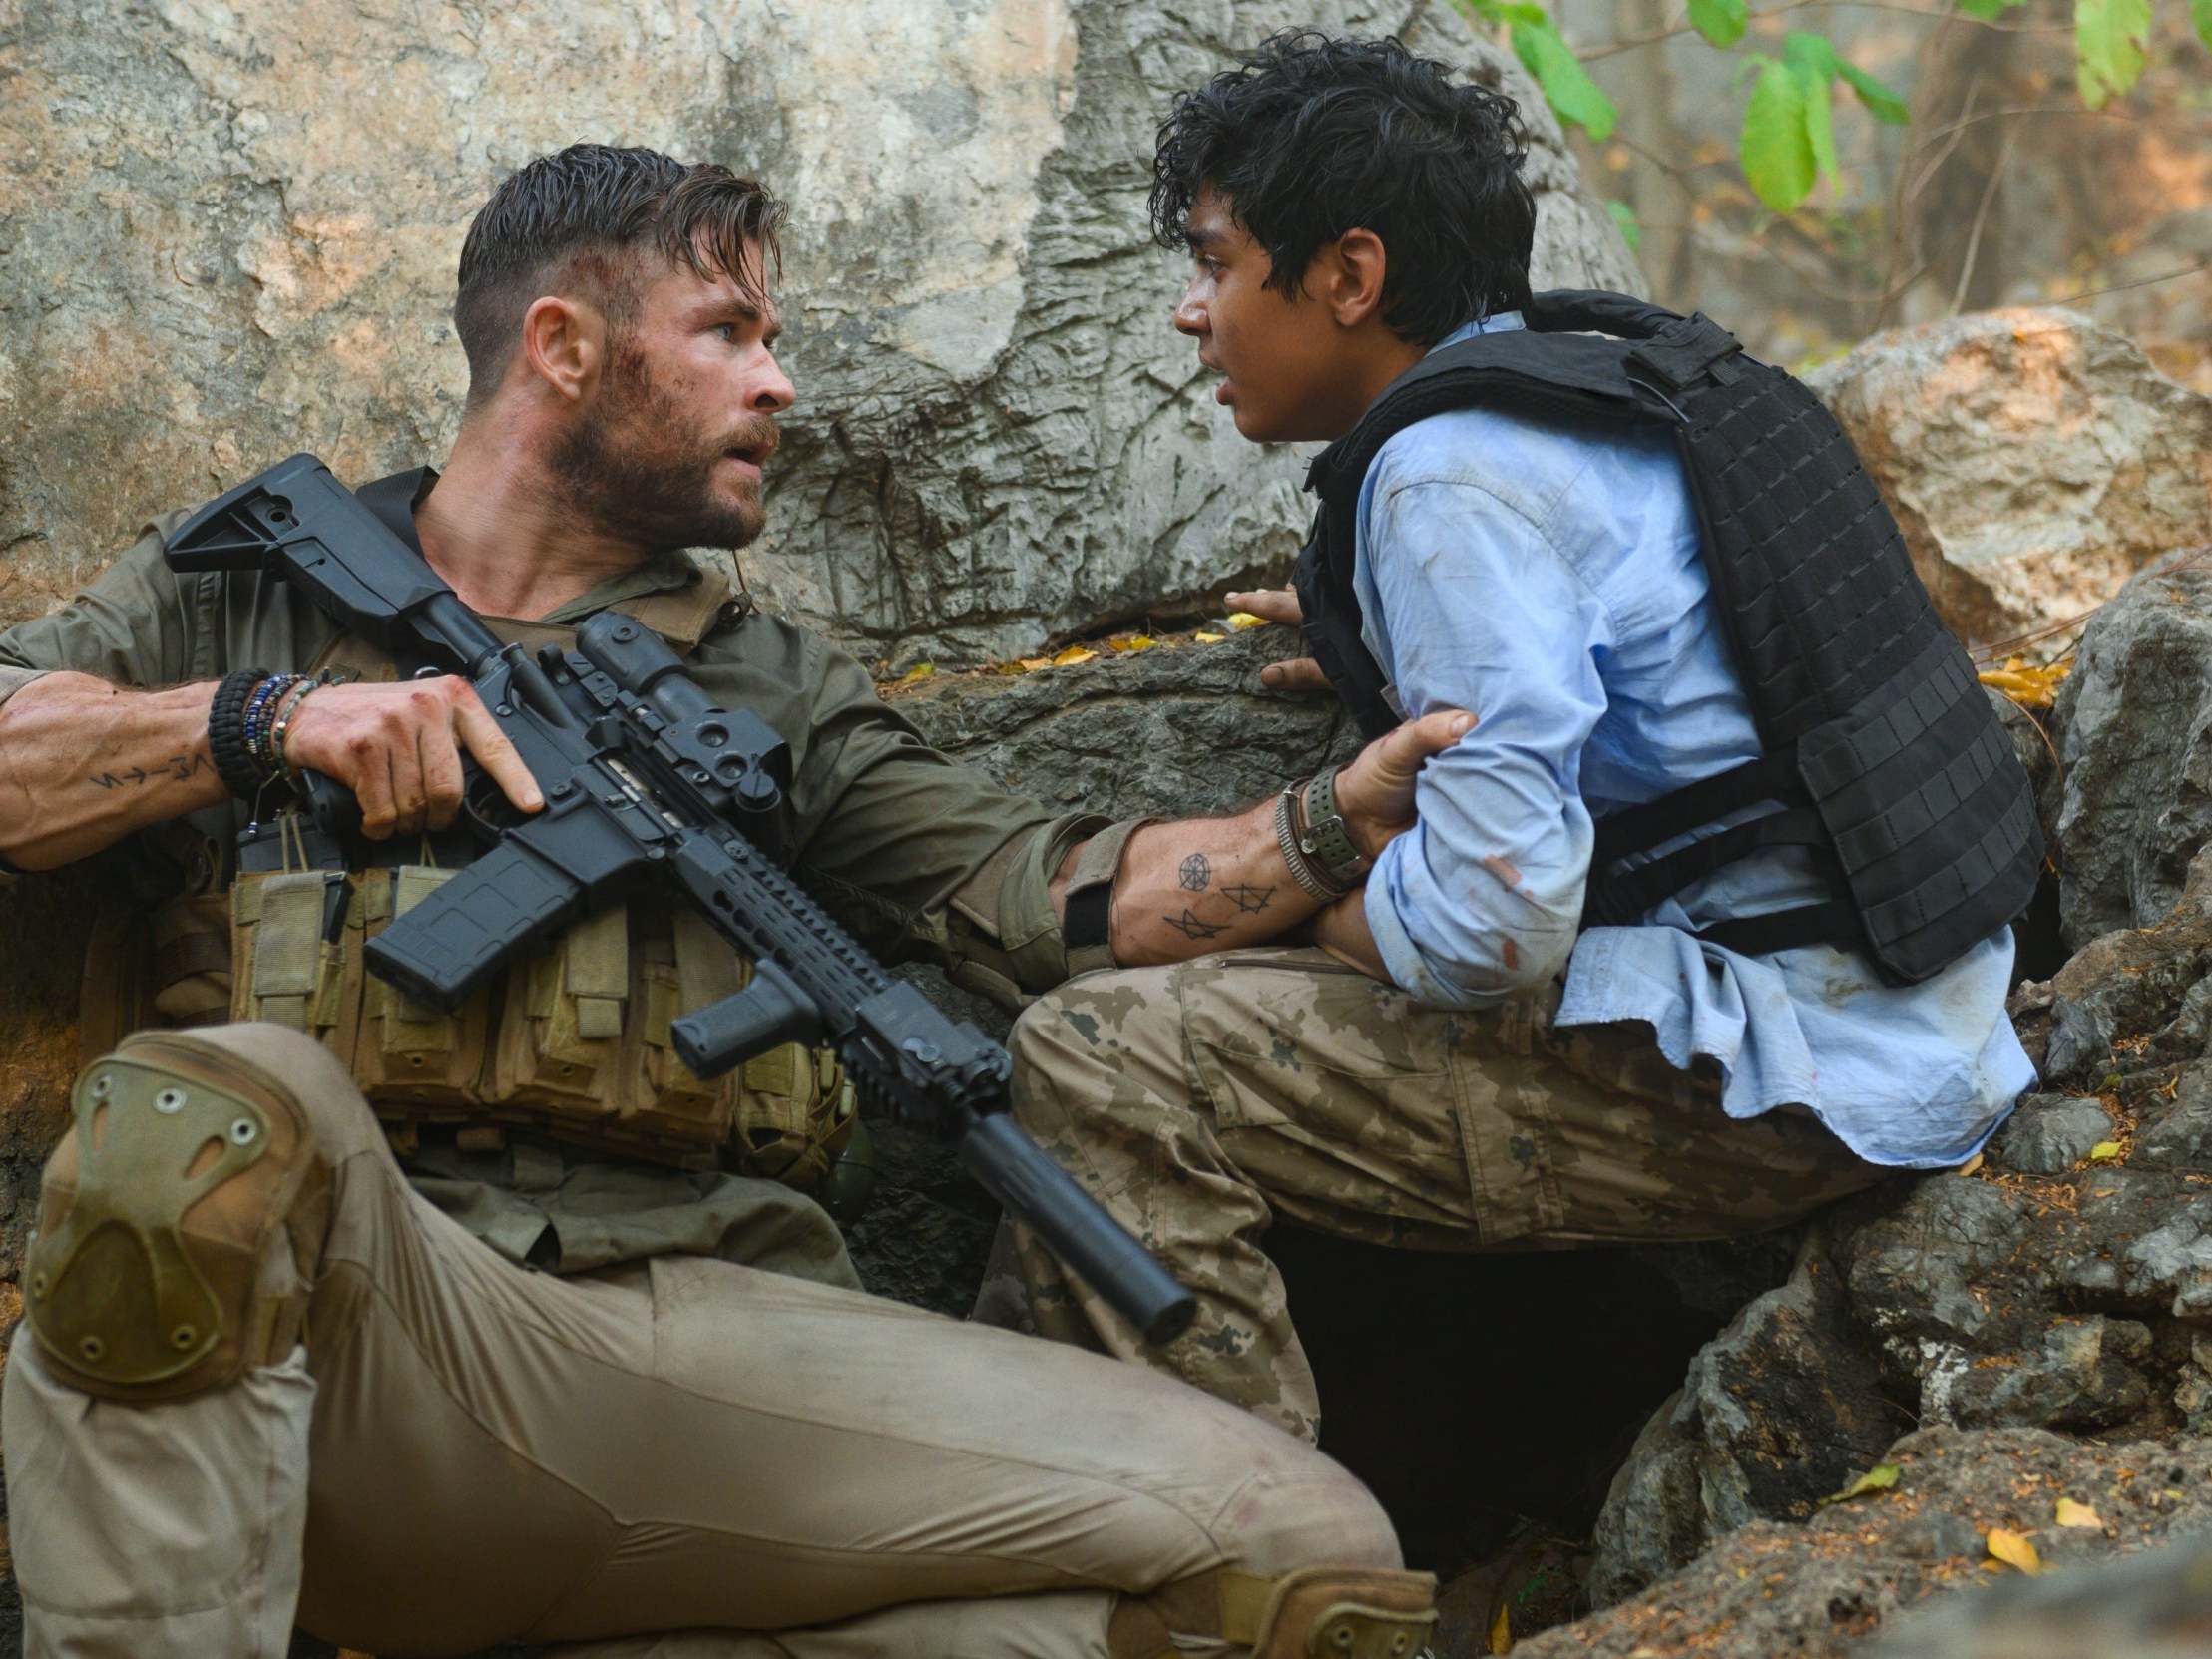 Chris Hemsworth stars as a black-market mercenary hired to rescue the kidnapped son of an Indian drug lord